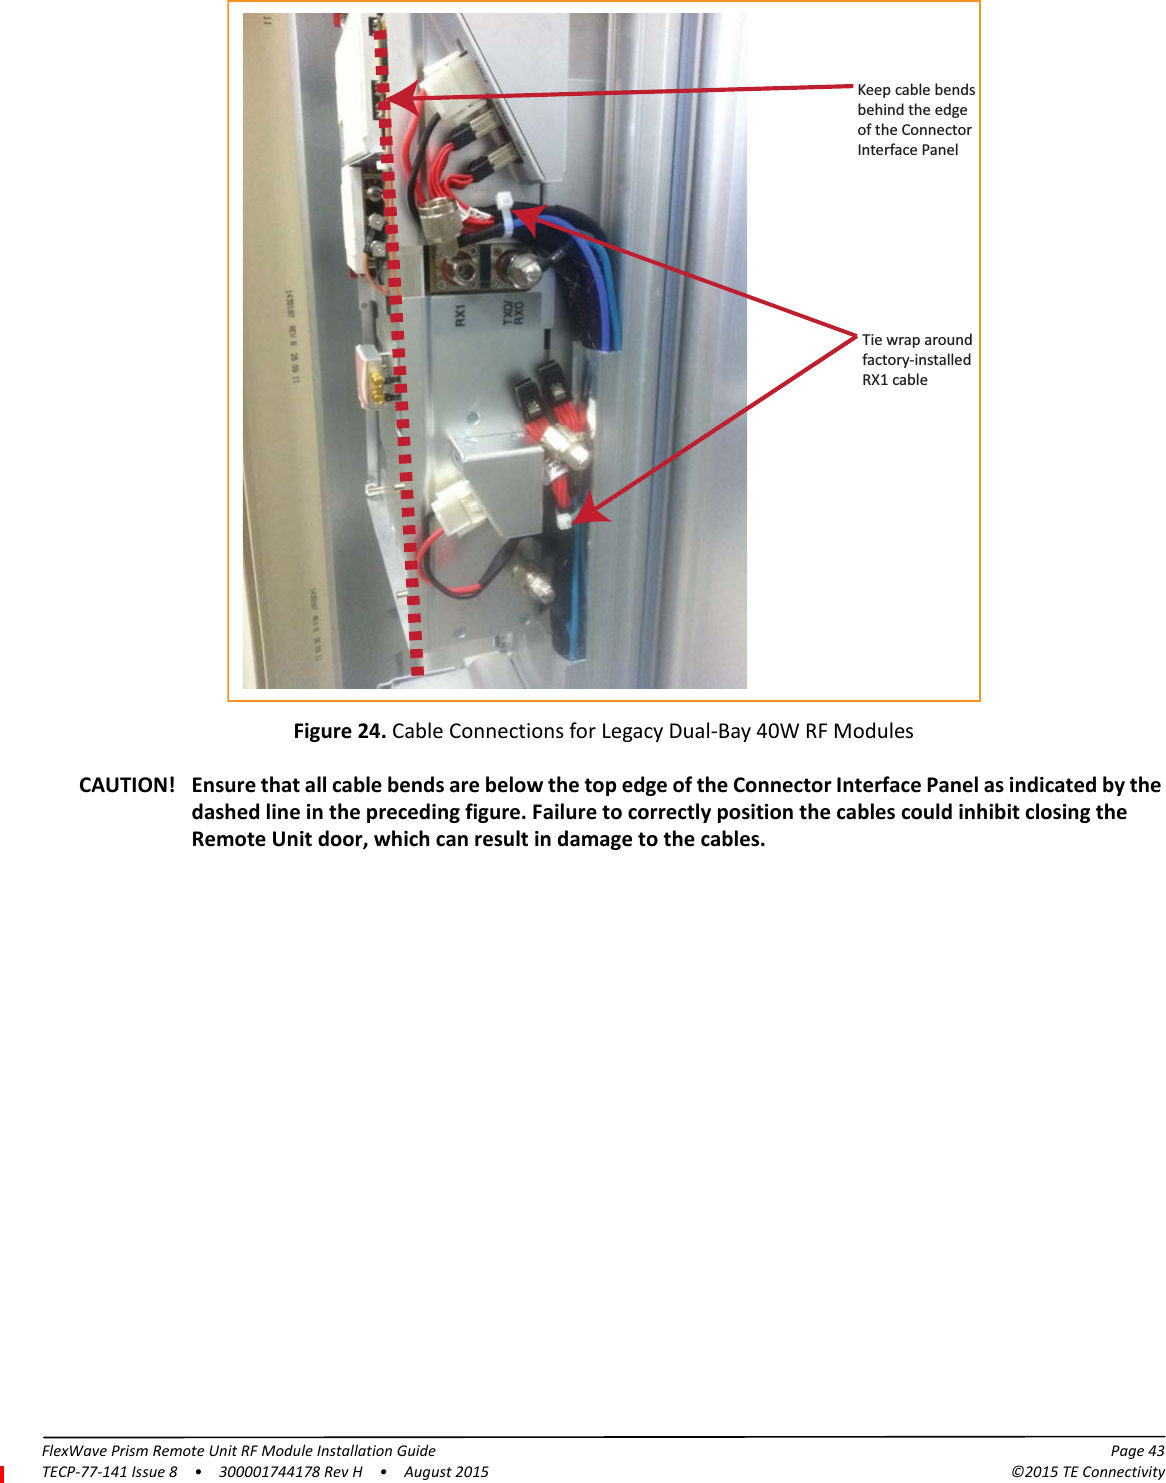 Tie wrap around factory-installedRX1 cableKeep cable bendsbehind the edge of the Connector Interface PanelFlexWave Prism Remote Unit RF Module Installation Guide Page 43TECP-77-141 Issue 8  •  300001744178 Rev H  •  August 2015 ©2015 TE ConnectivityFigure 24. Cable Connections for Legacy Dual-Bay 40W RF ModulesCAUTION! Ensure that all cable bends are below the top edge of the Connector Interface Panel as indicated by the dashed line in the preceding figure. Failure to correctly position the cables could inhibit closing the Remote Unit door, which can result in damage to the cables.